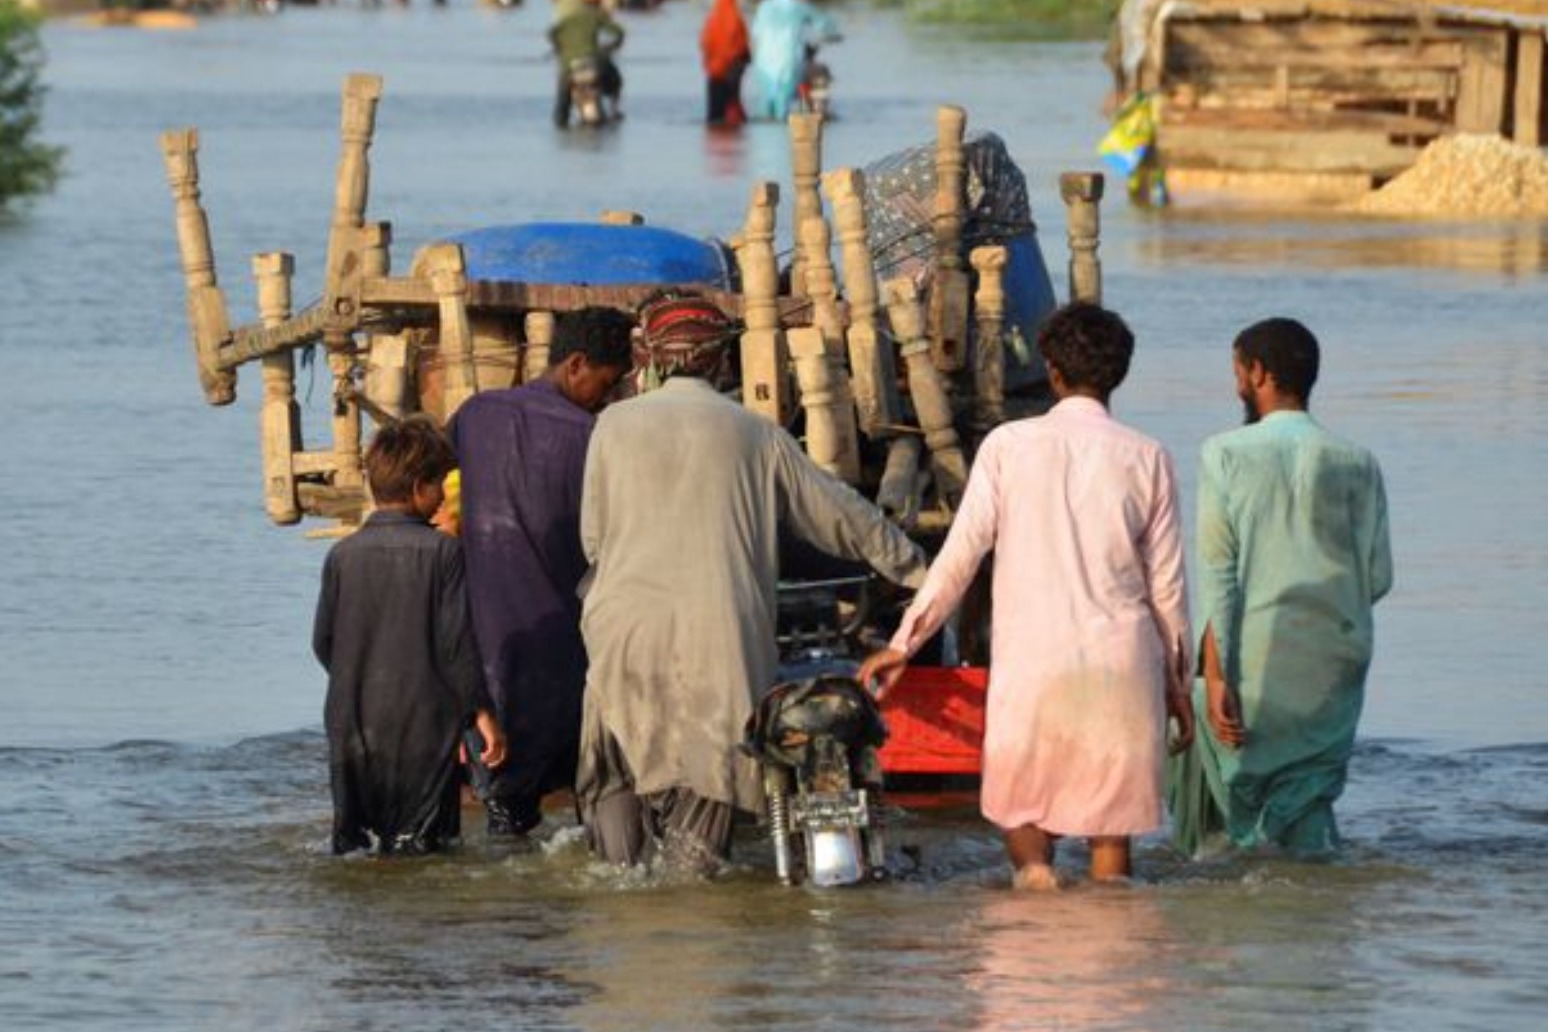 UN seeks £136m of emergency aid for victims of Pakistan floods 